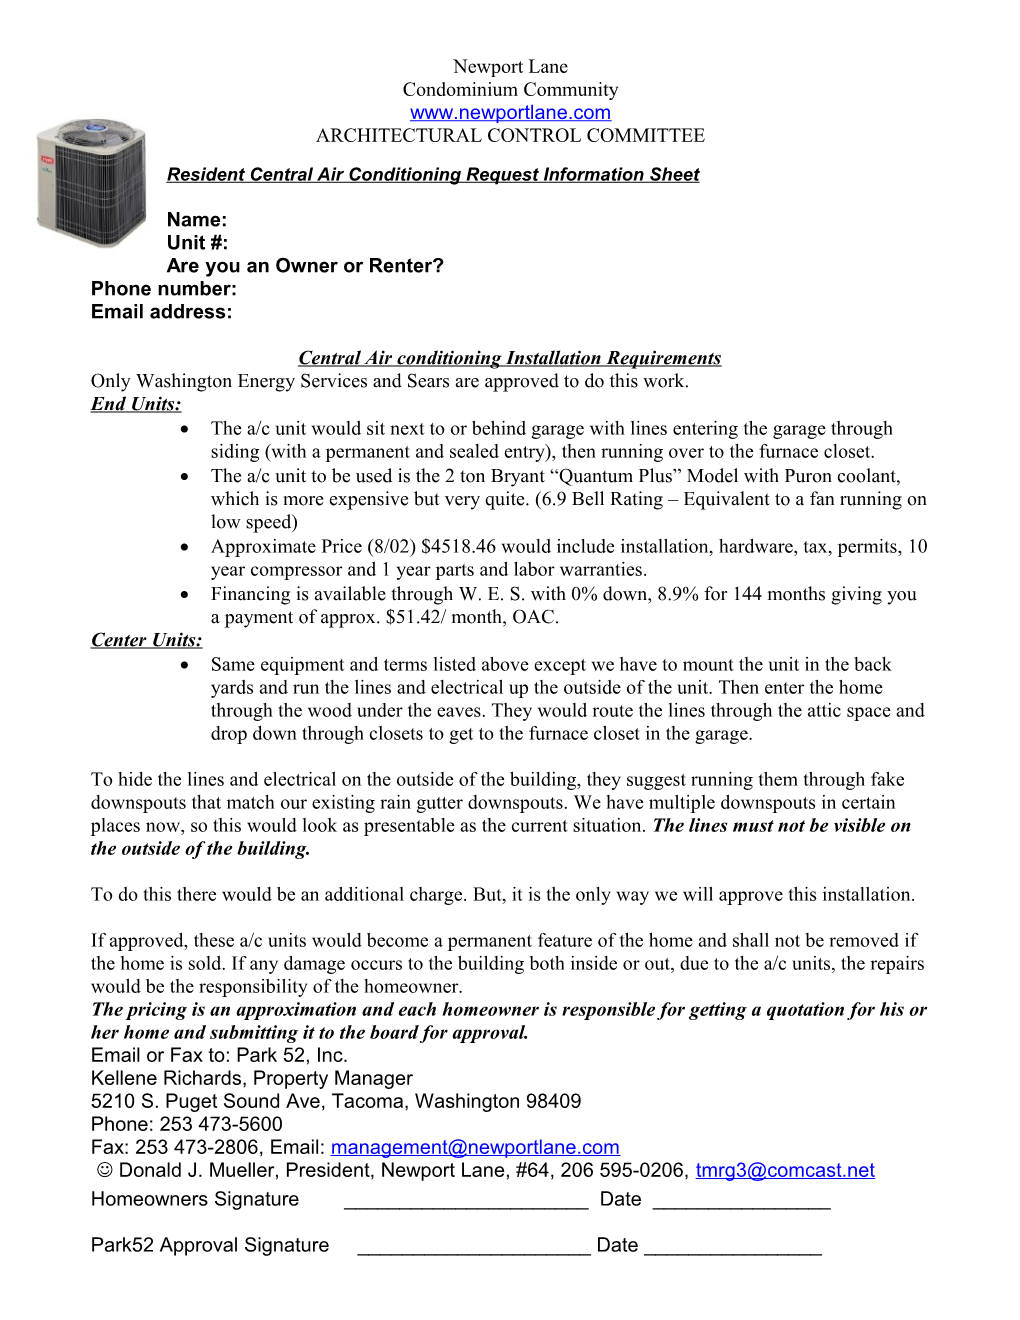 Residentcentral Air Conditioning Request Information Sheet